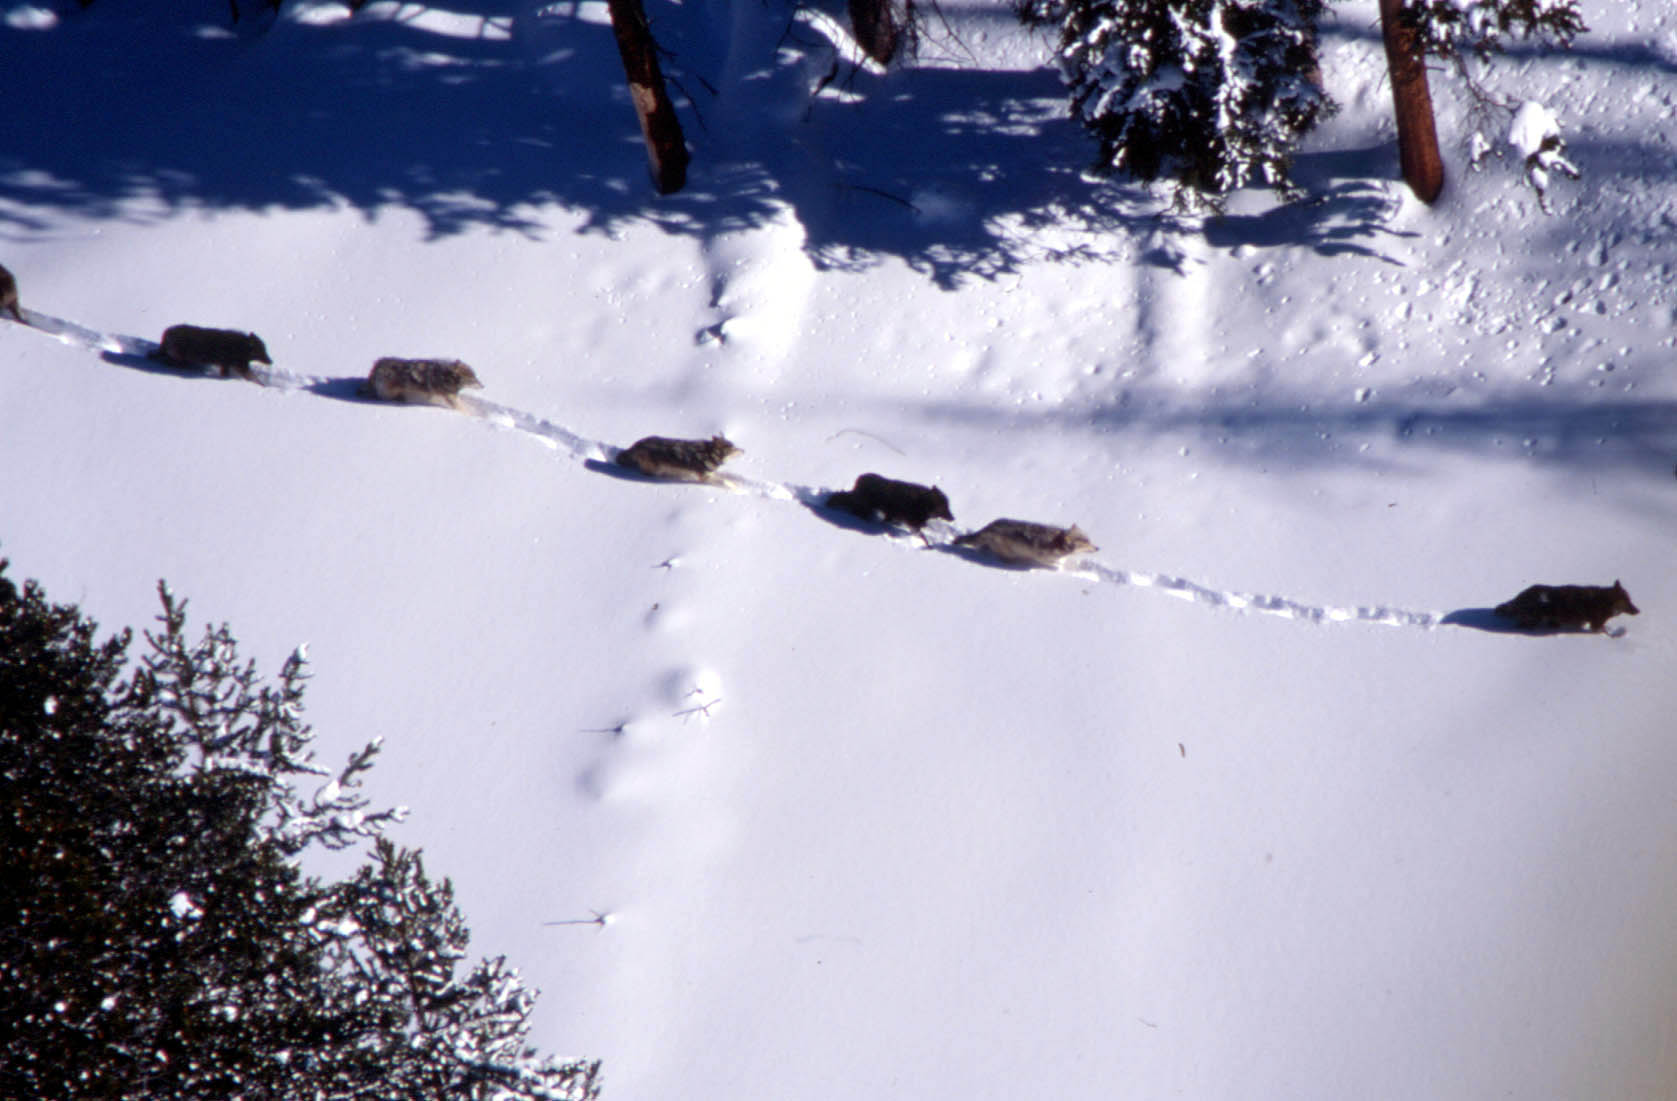 A pack of gray wolves travel single file in the snow